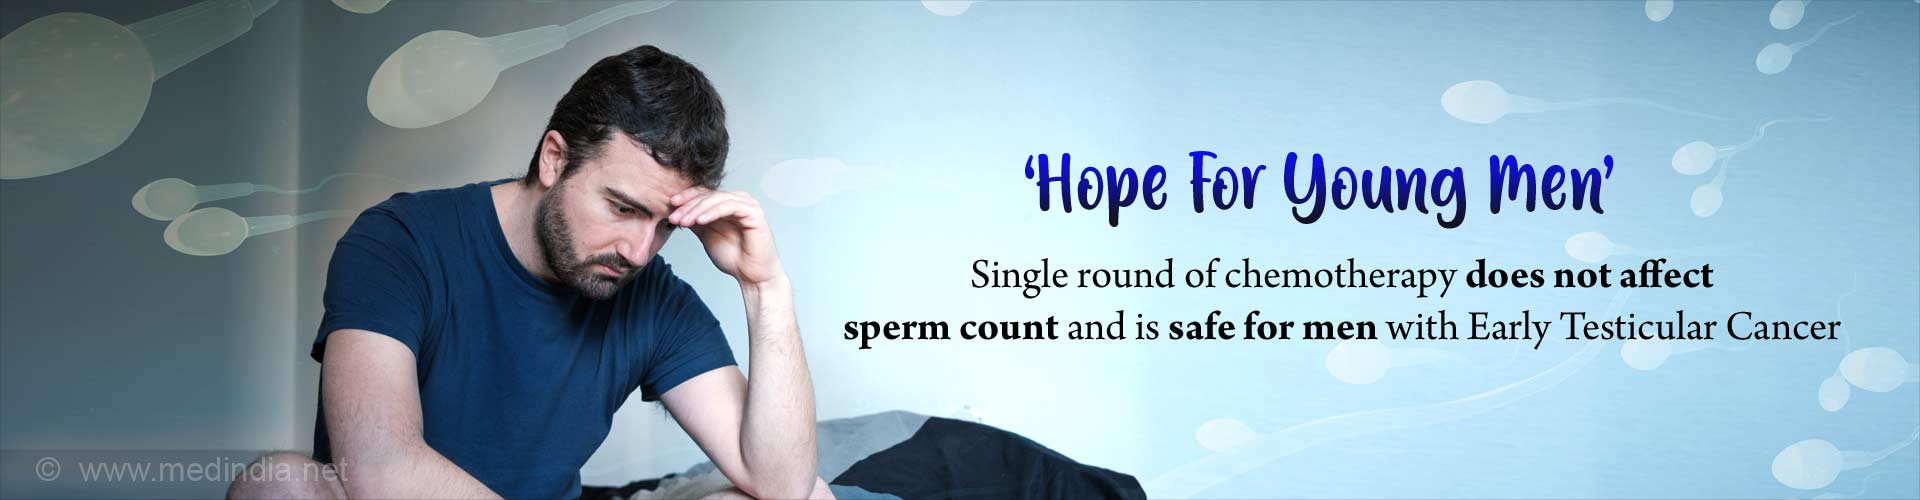 Hope for young men. Single round of chemotherapy does not affect sperm count and is safe for men with early testis cancer. 